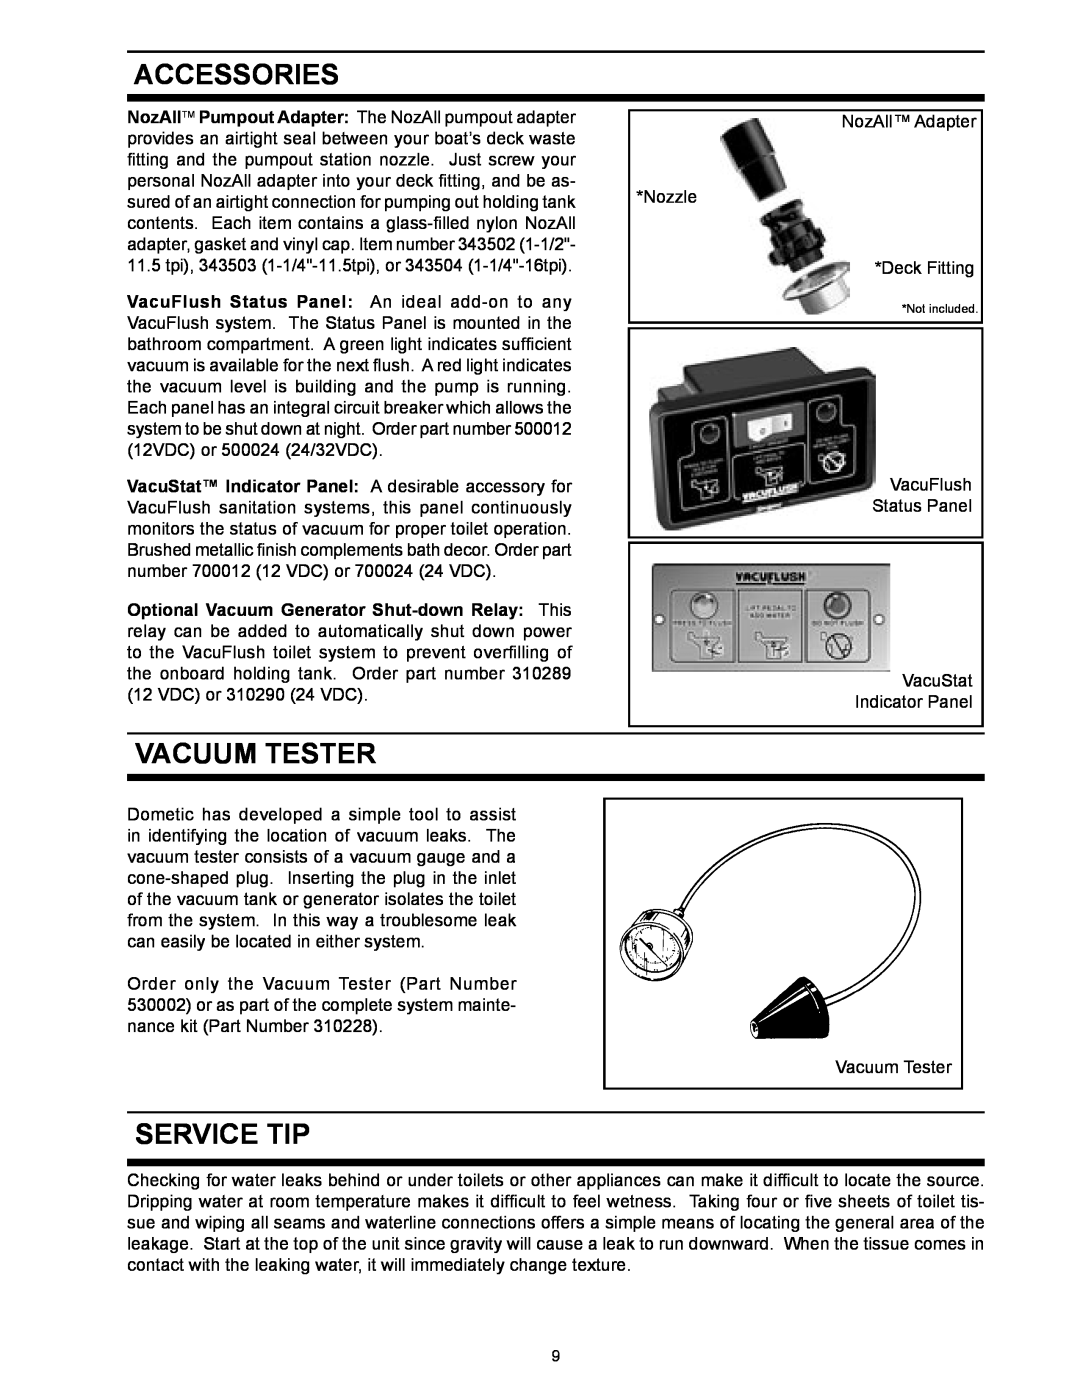 Dometic 706 owner manual Accessories, Vacuum Tester, Service Tip 